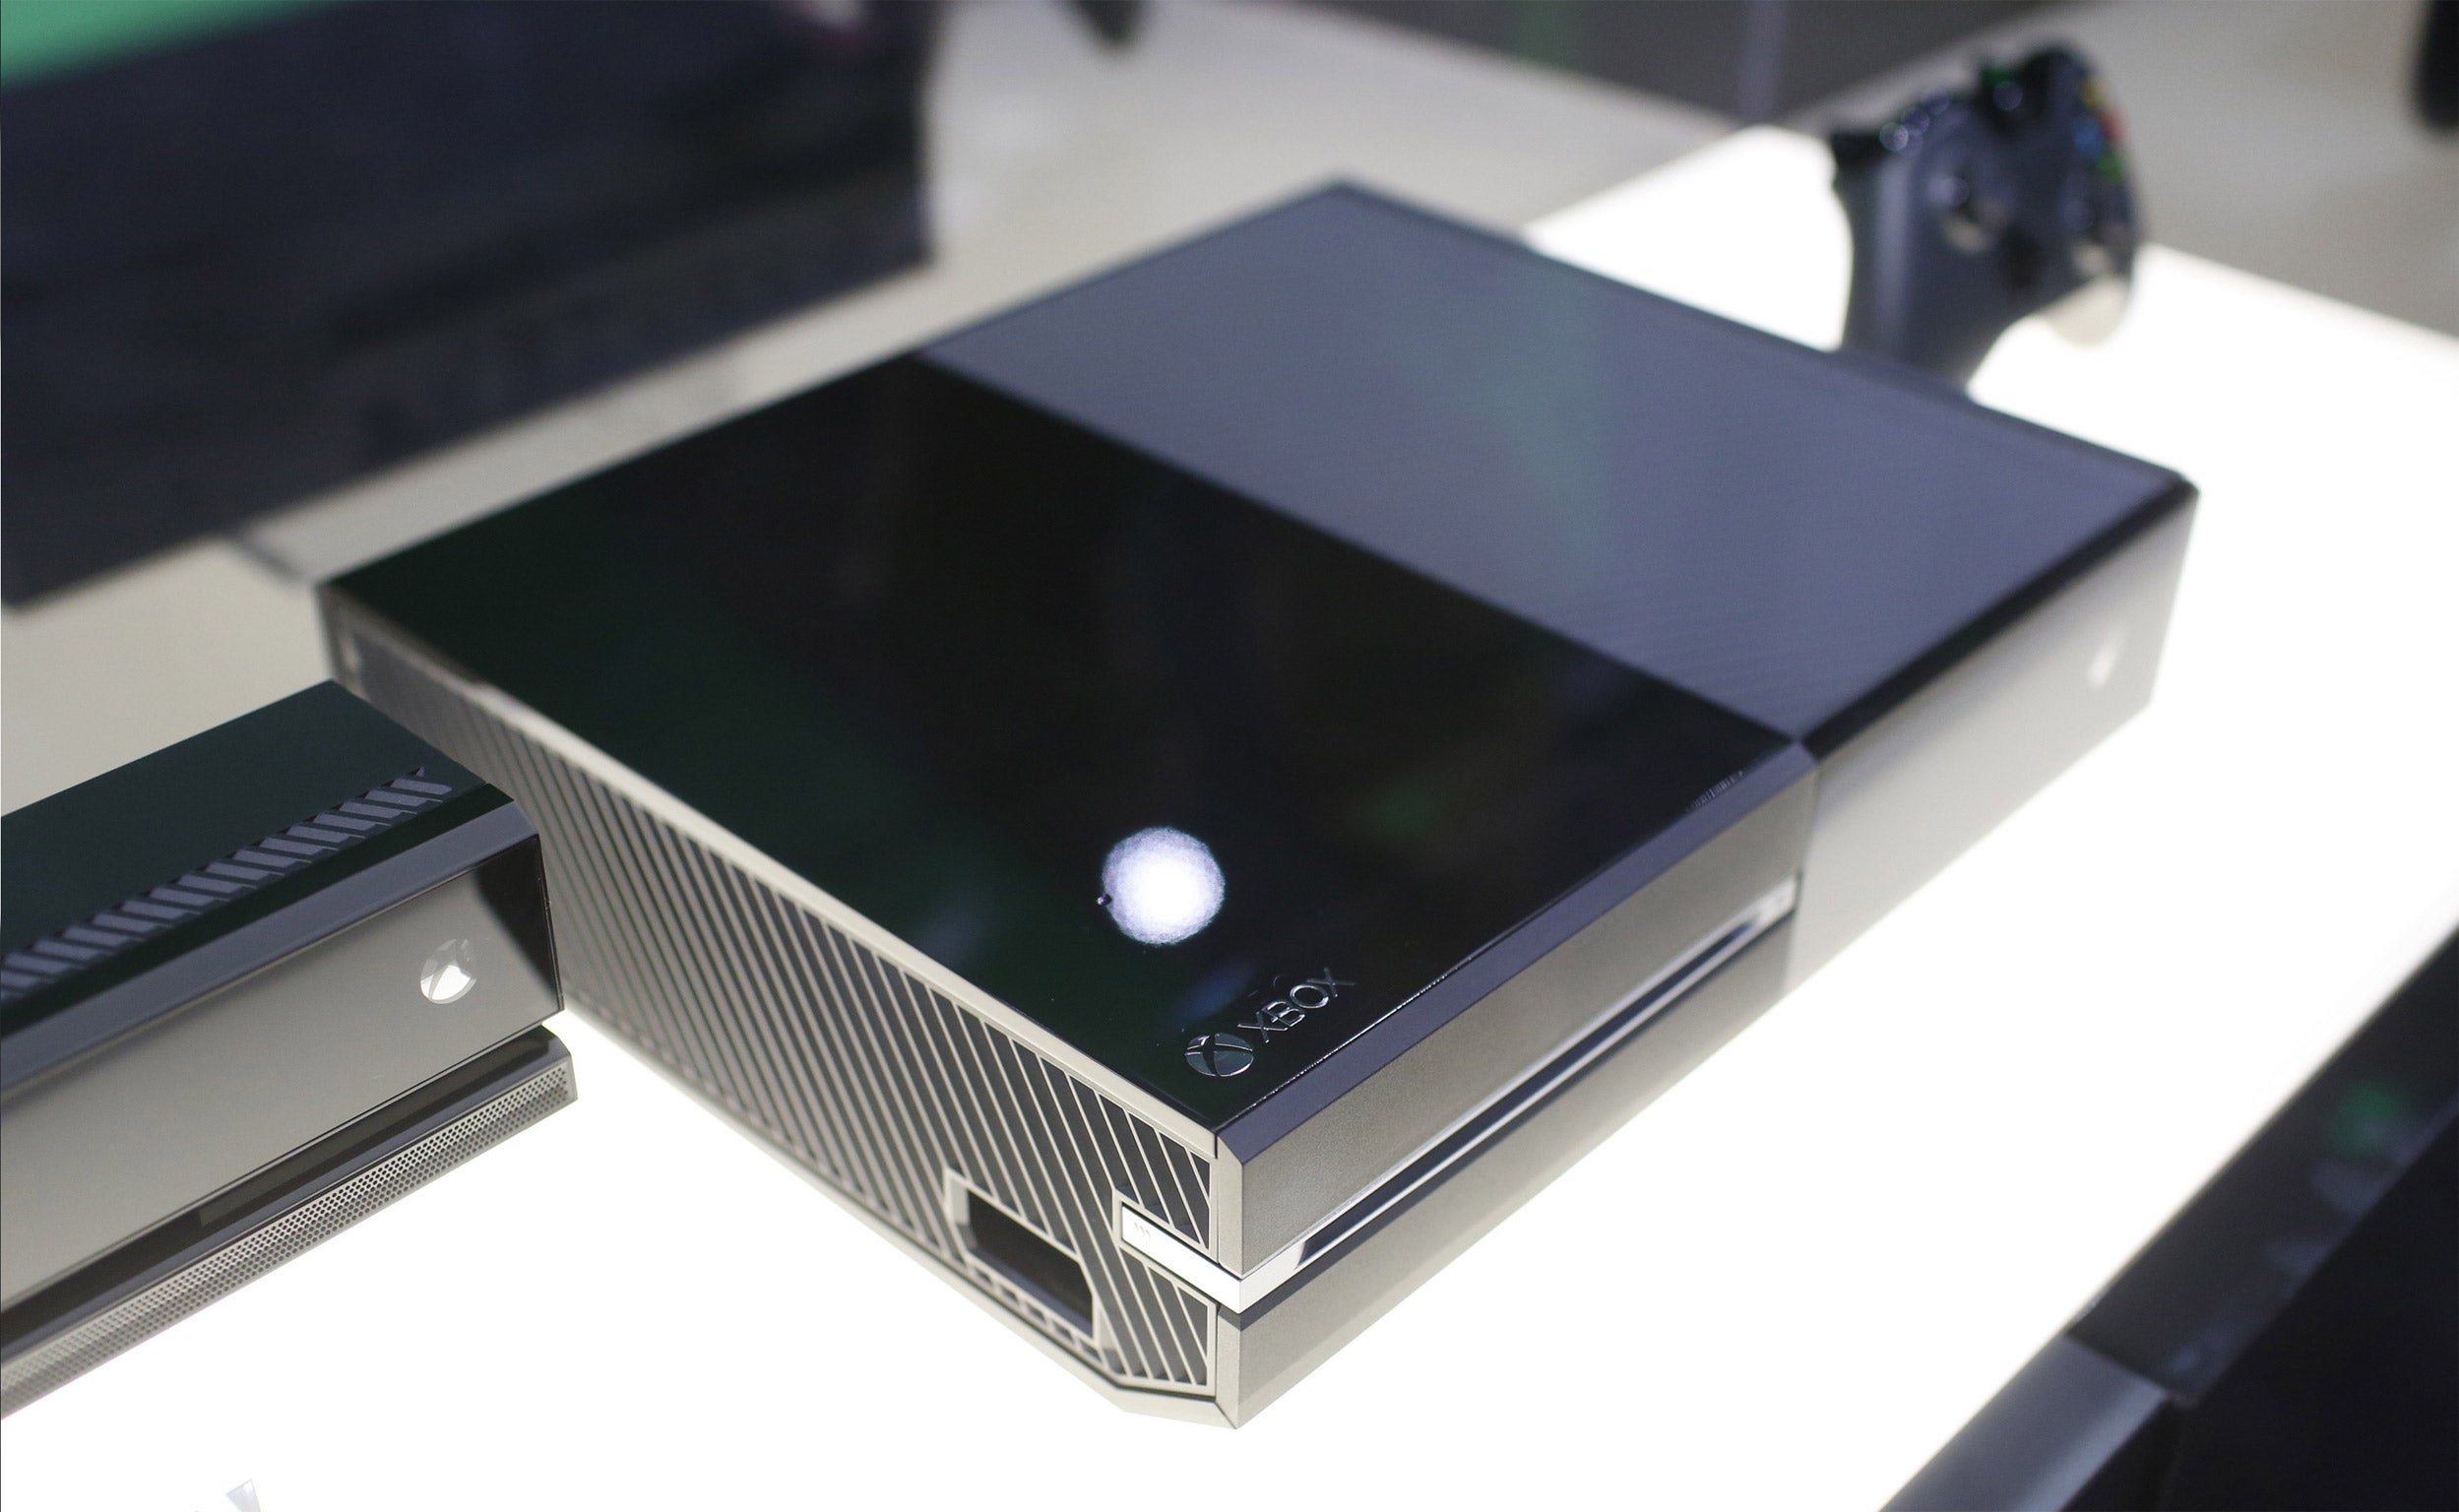 The Xbox One is shown with its controller (right) and a Kinect bar (left)